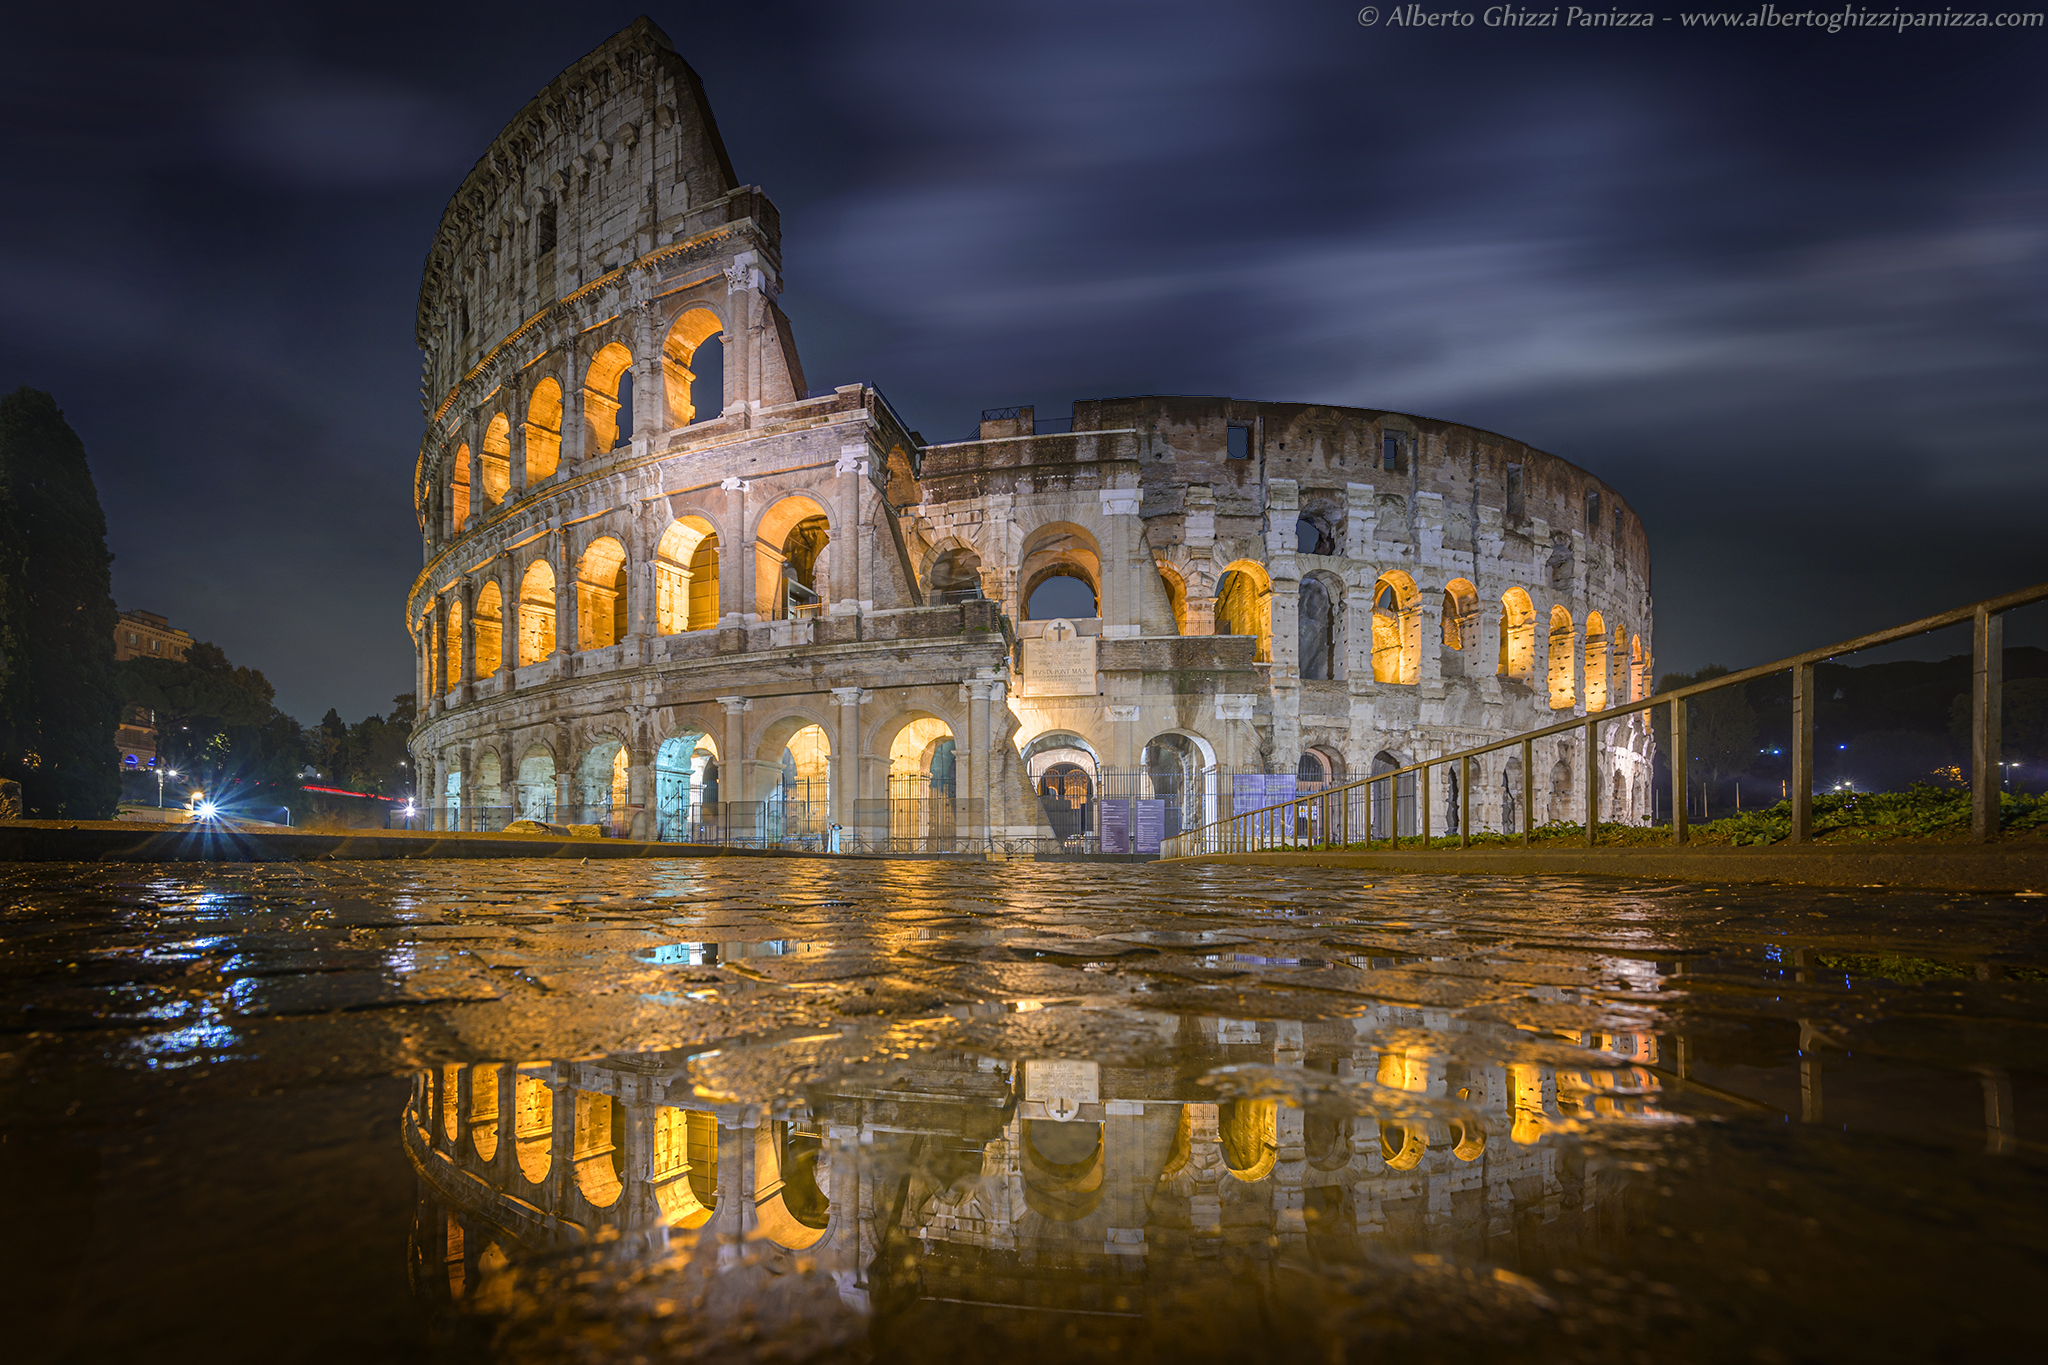 Reflections of the Colosseum...